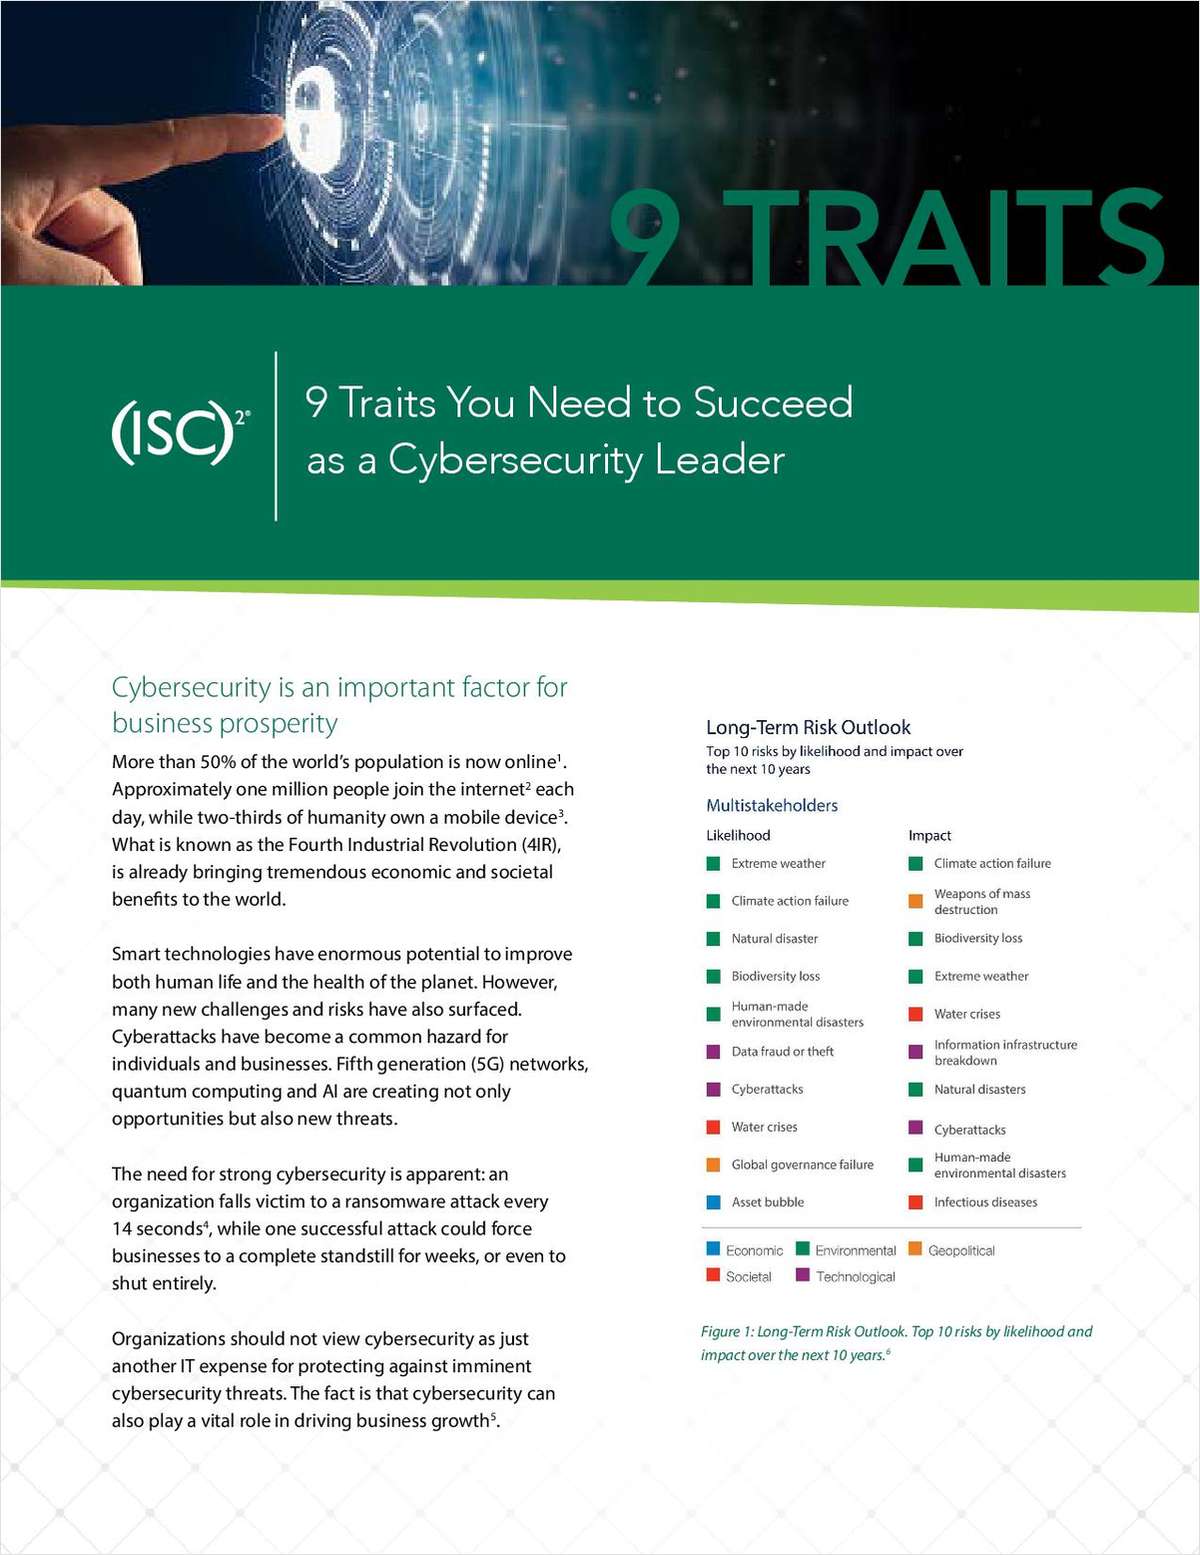 Top 9 Traits You Need to Succeed as a Cybersecurity Leader